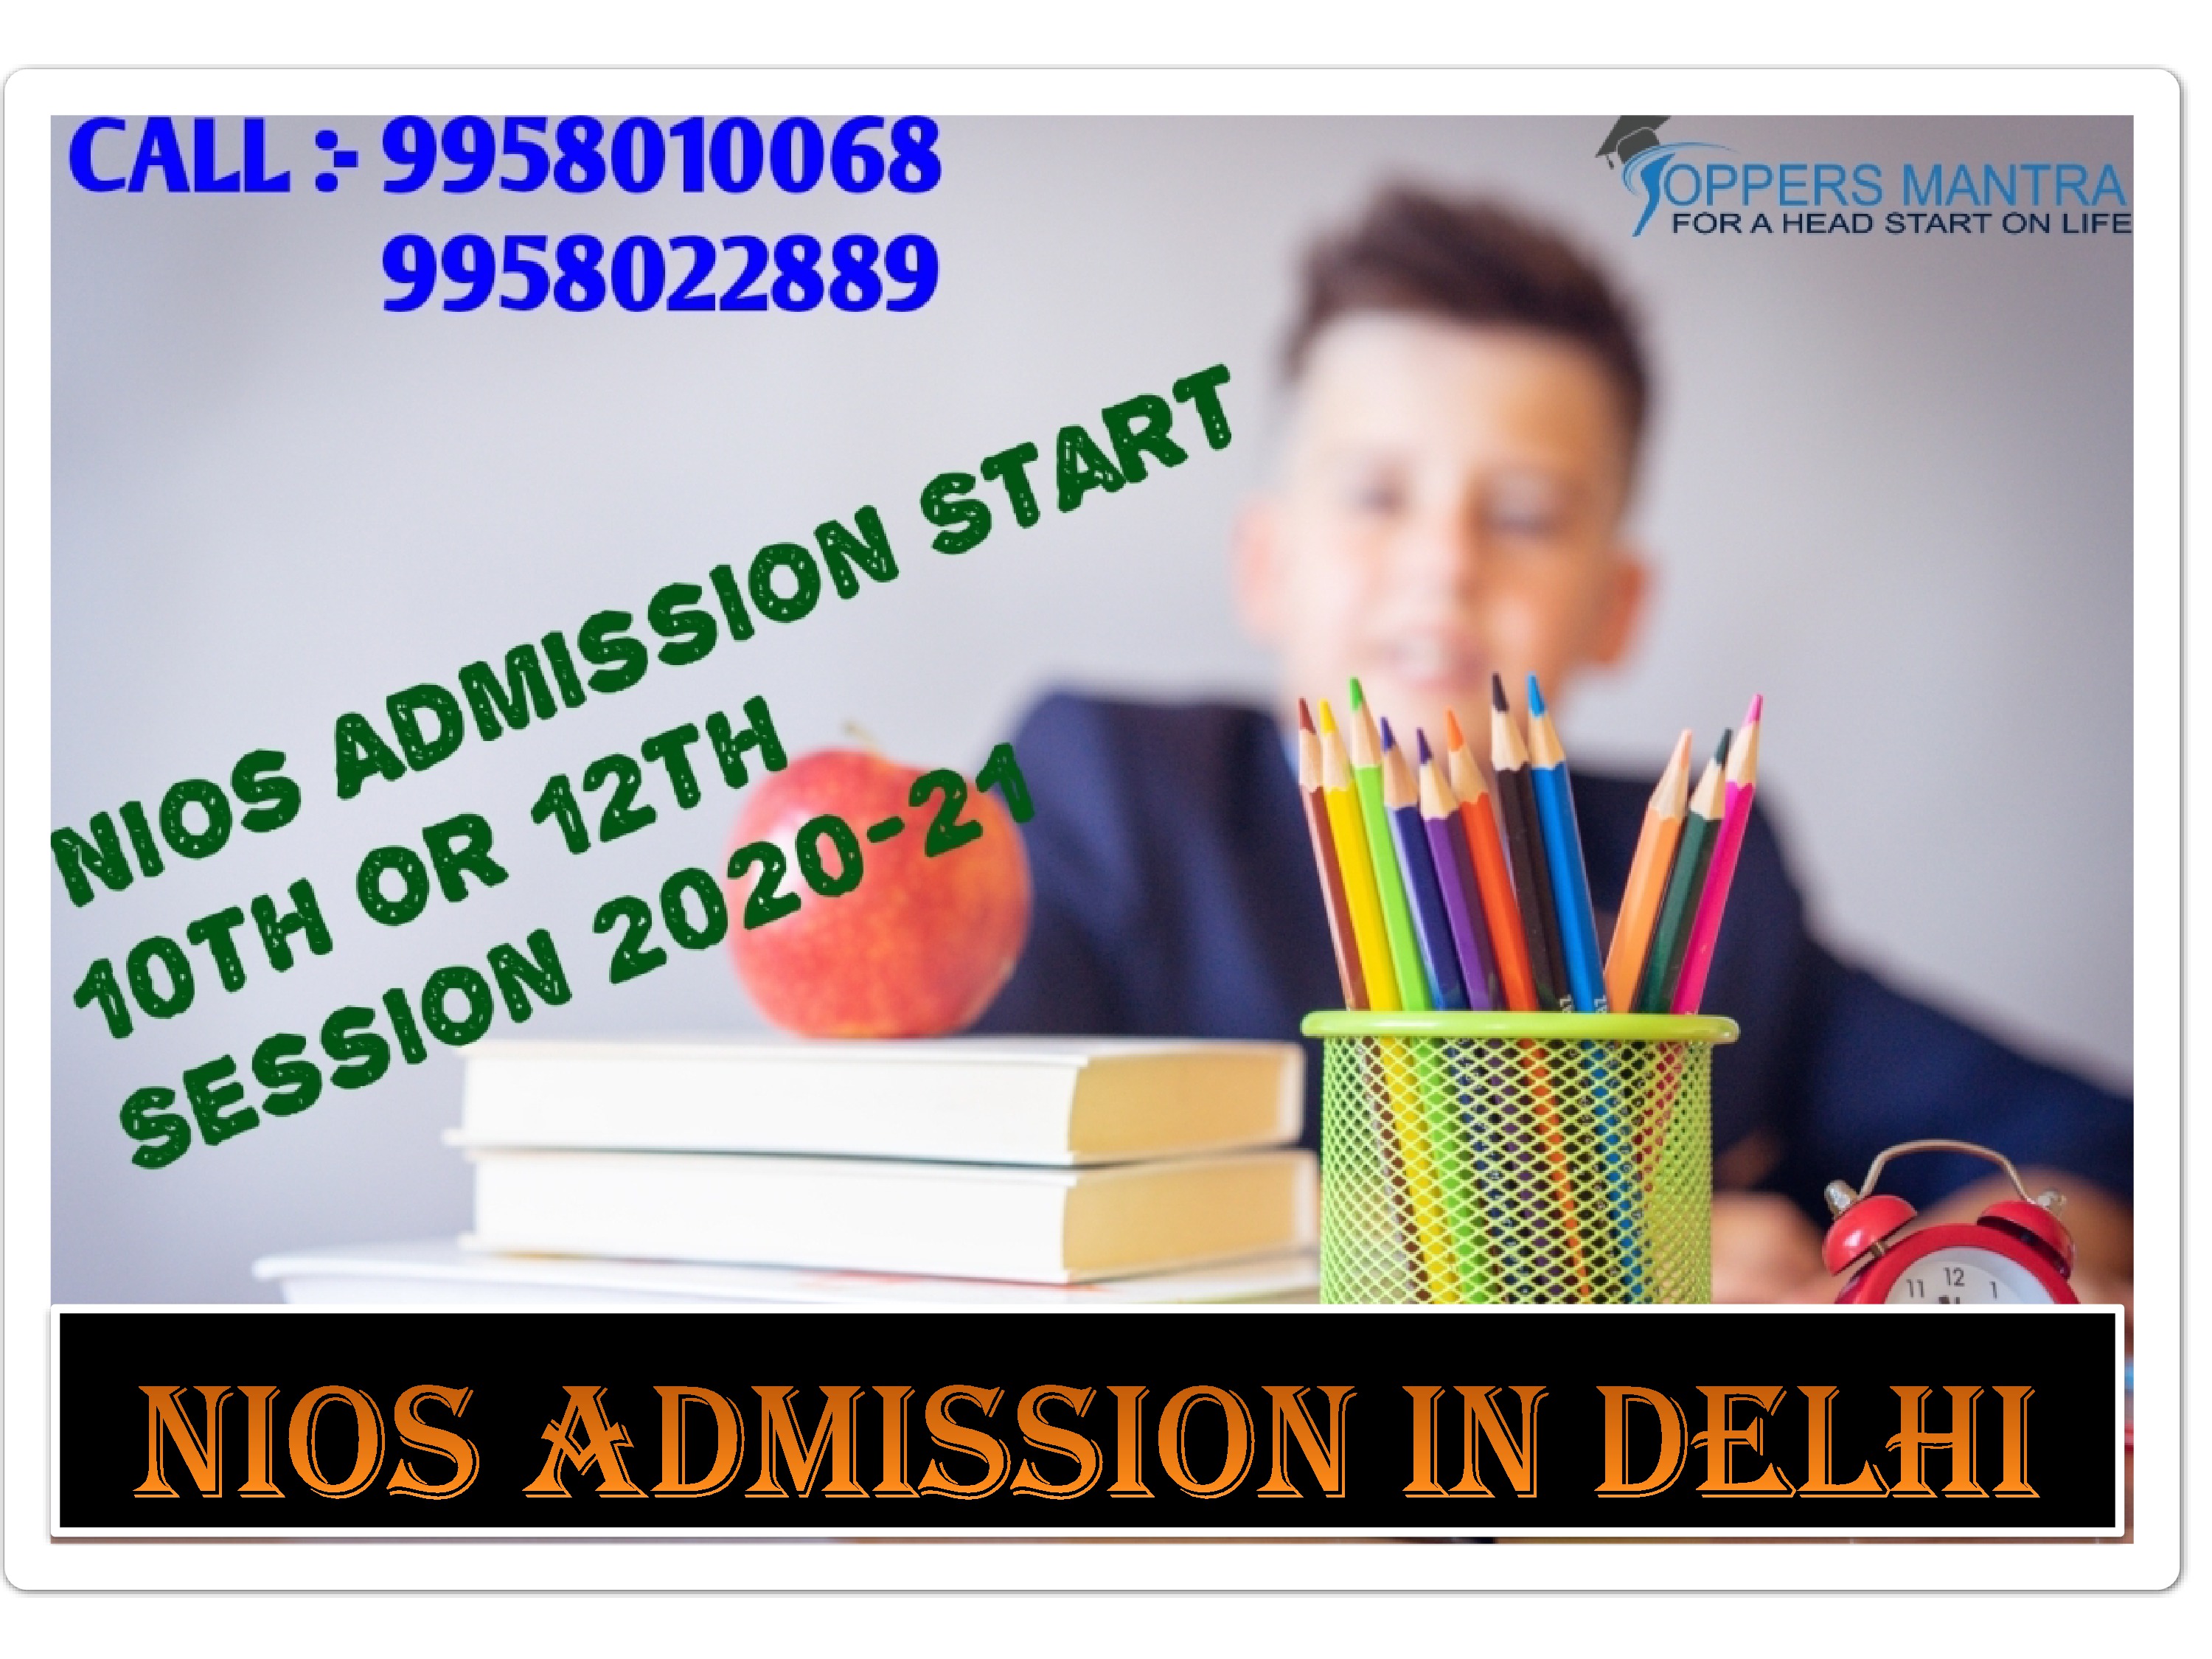 NIOS-ADMISSION-10TH-12TH-TOPPERS-MANTRA